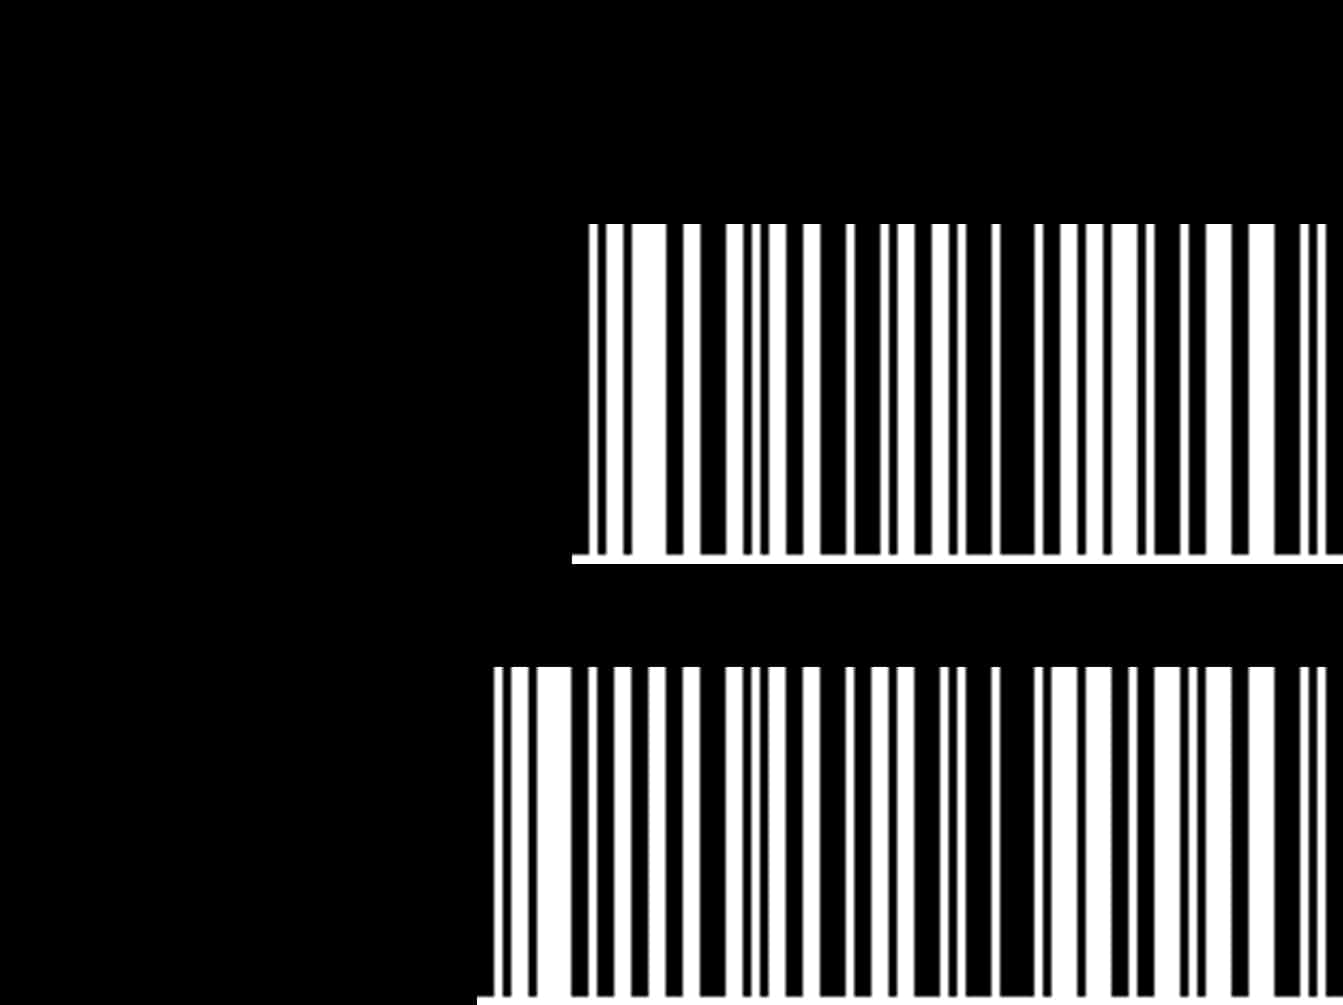 Abstract Barcode Design PNG image